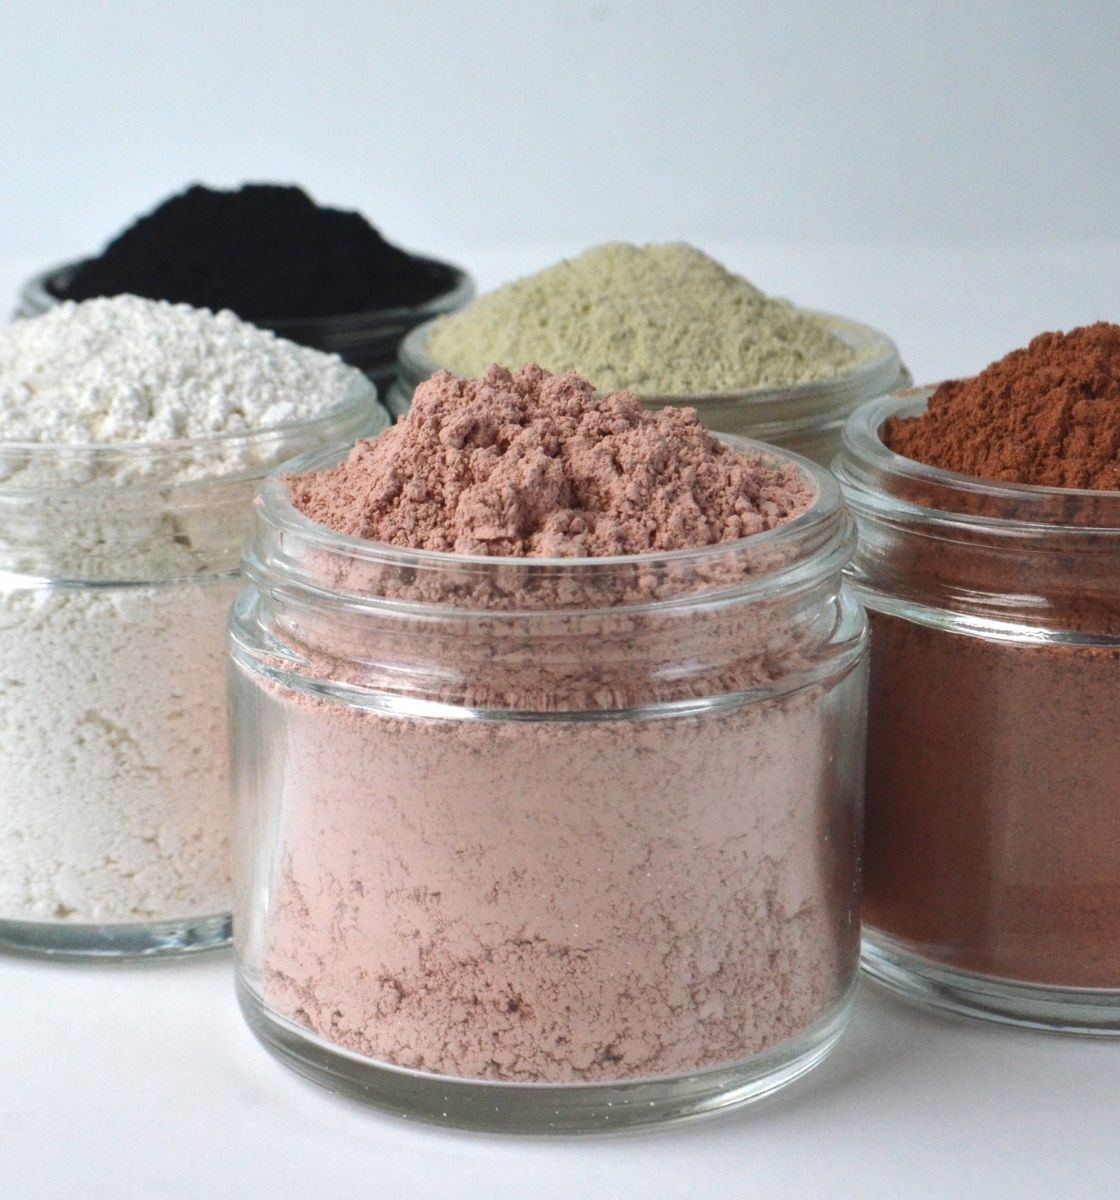 Cosmetic Clays